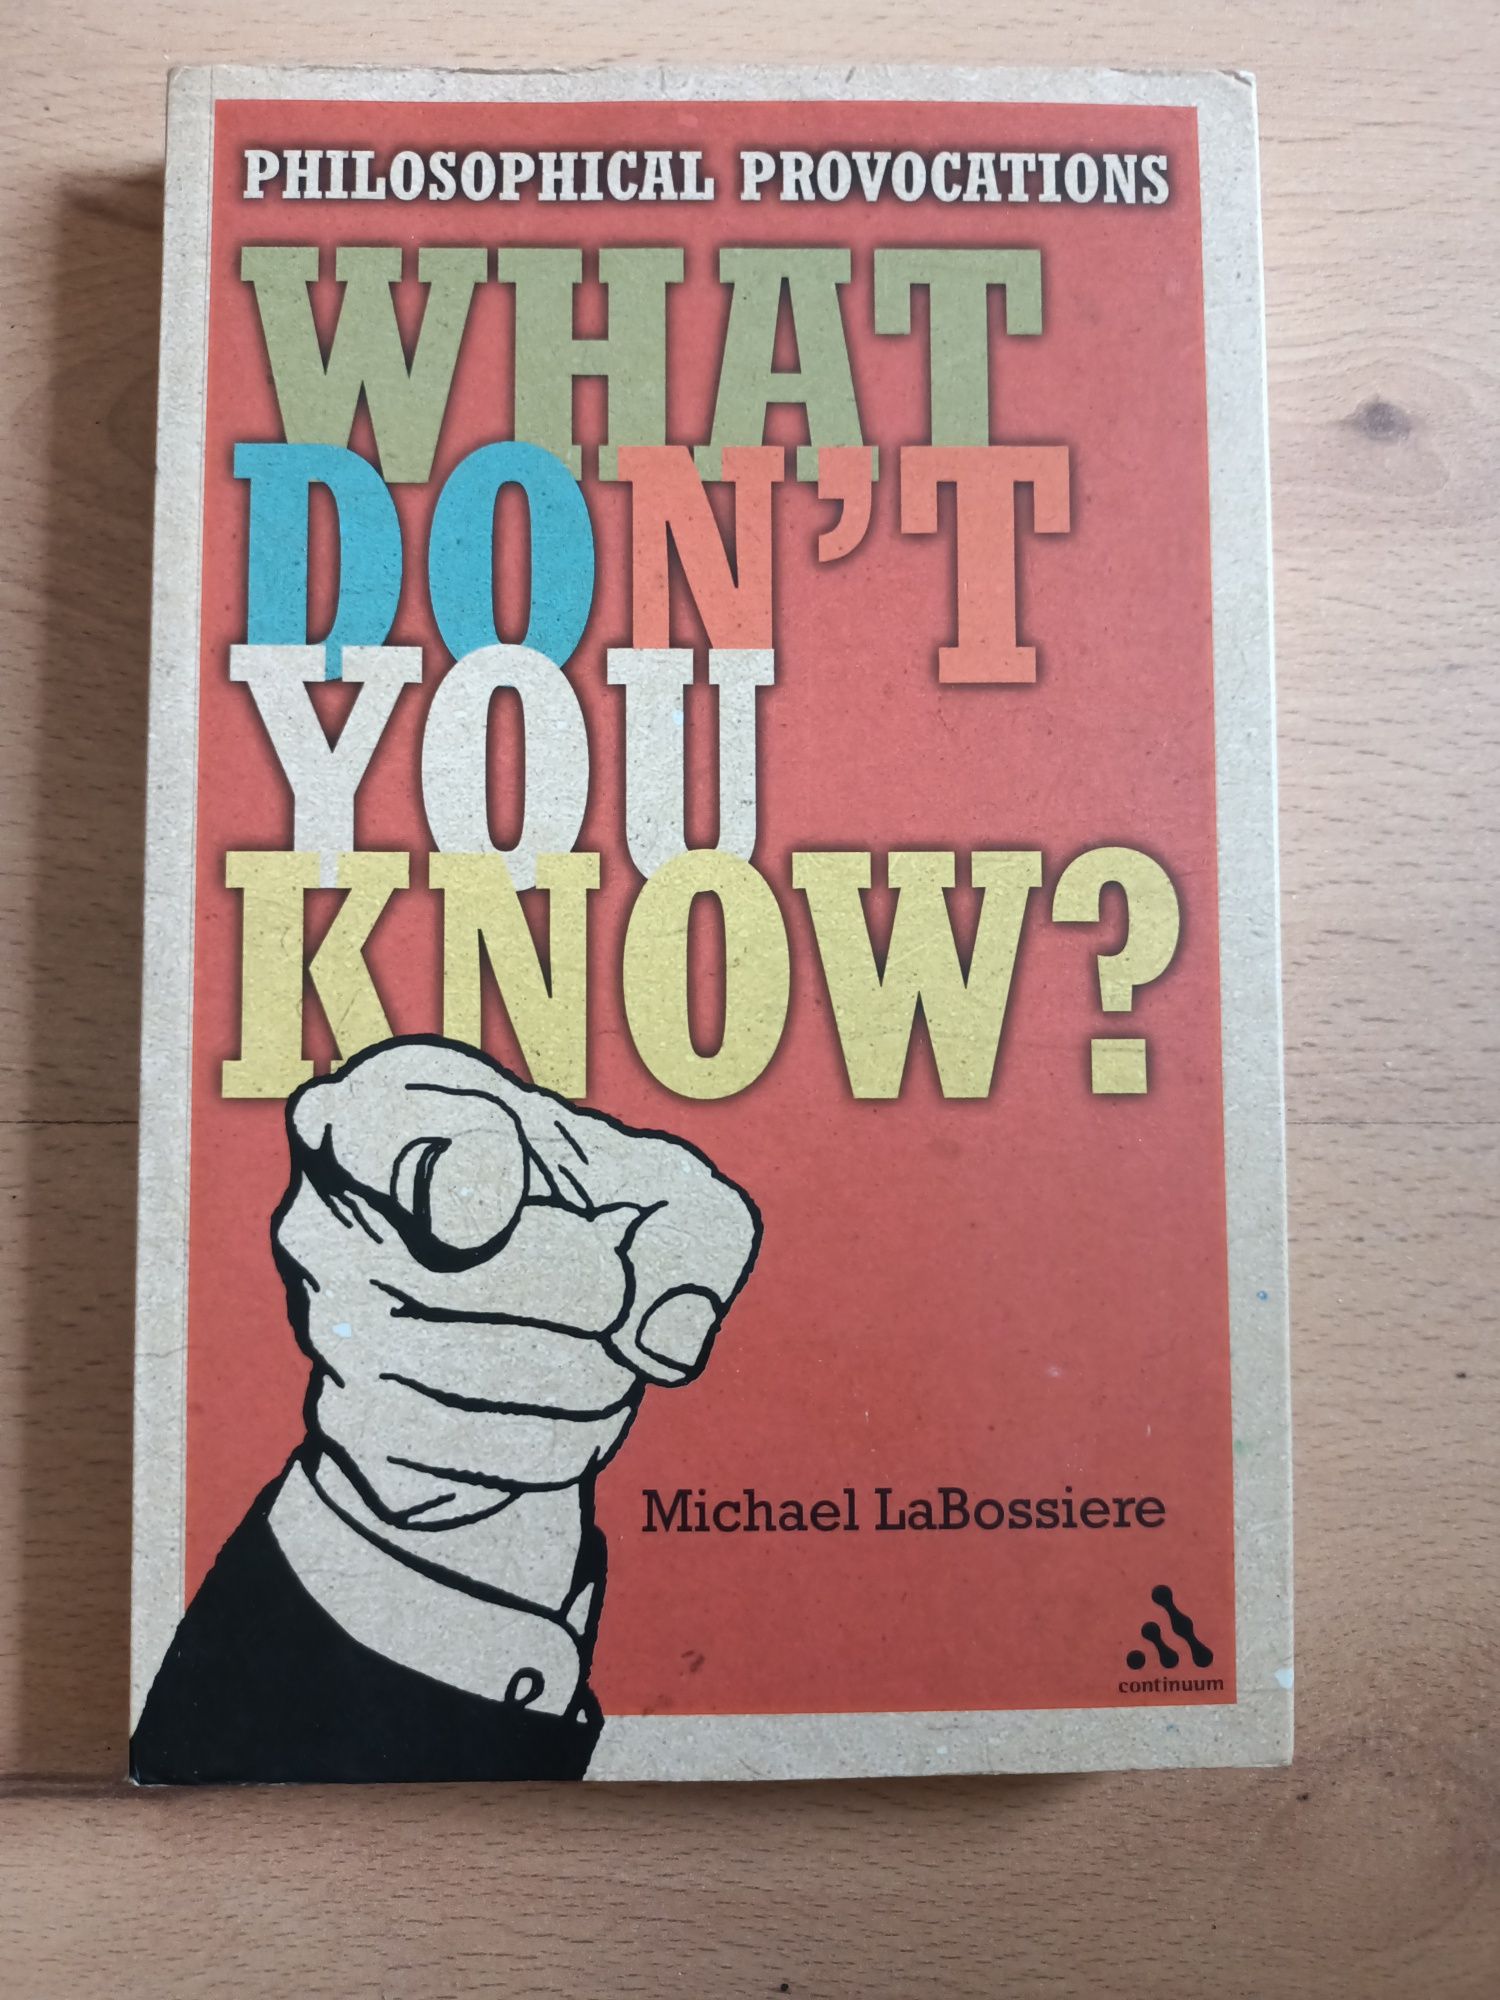 What you don't know? Michael LaBossiere